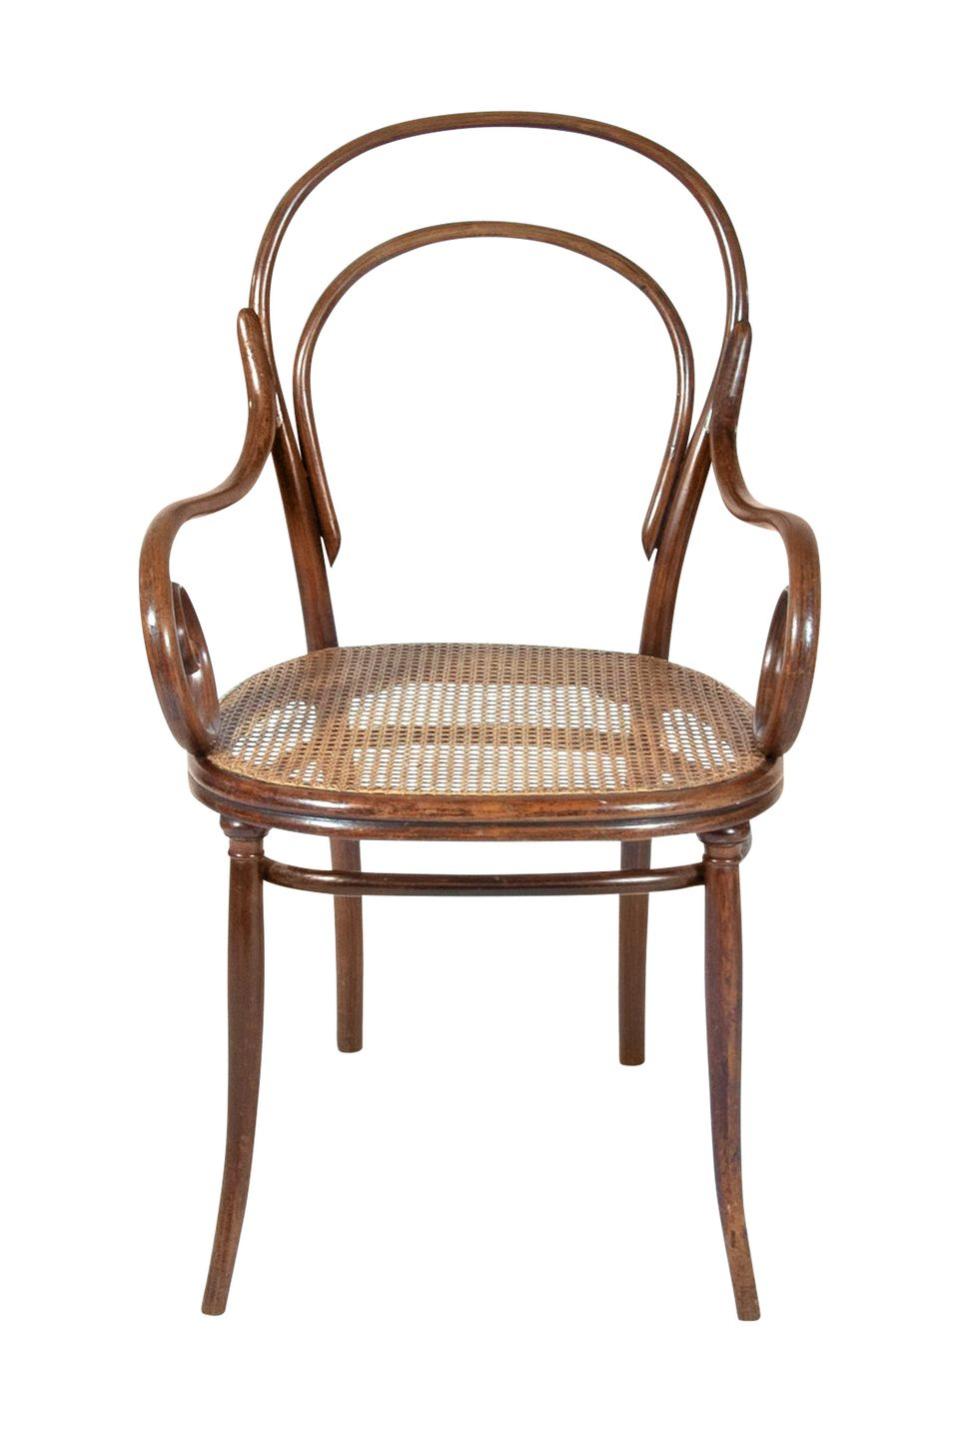 Late-19th-Century Thonet Bentwood Chair